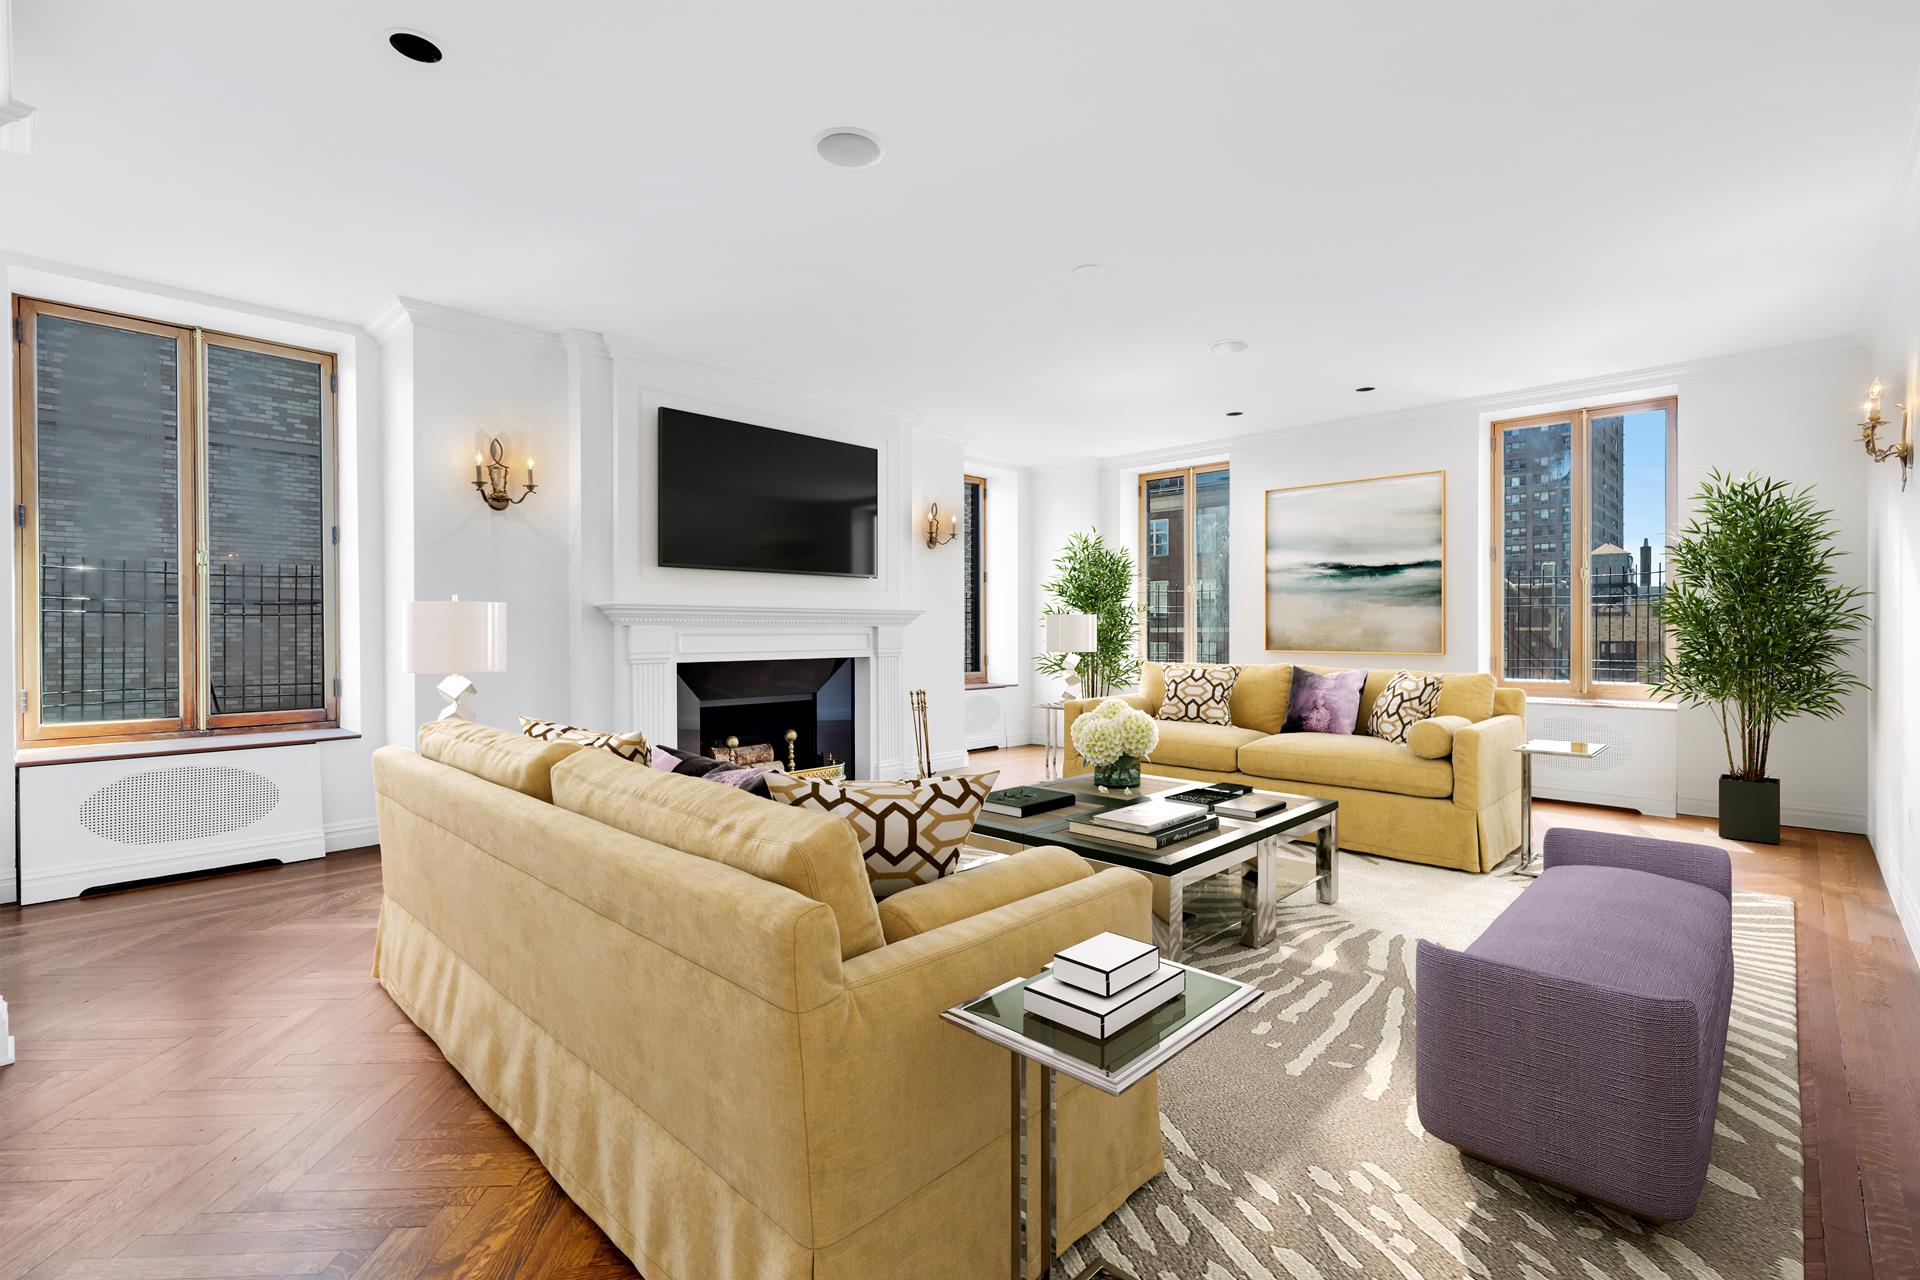 1075 Park Avenue 14A, Carnegie Hill, Upper East Side, NYC - 2 Bedrooms  
2.5 Bathrooms  
6 Rooms - 